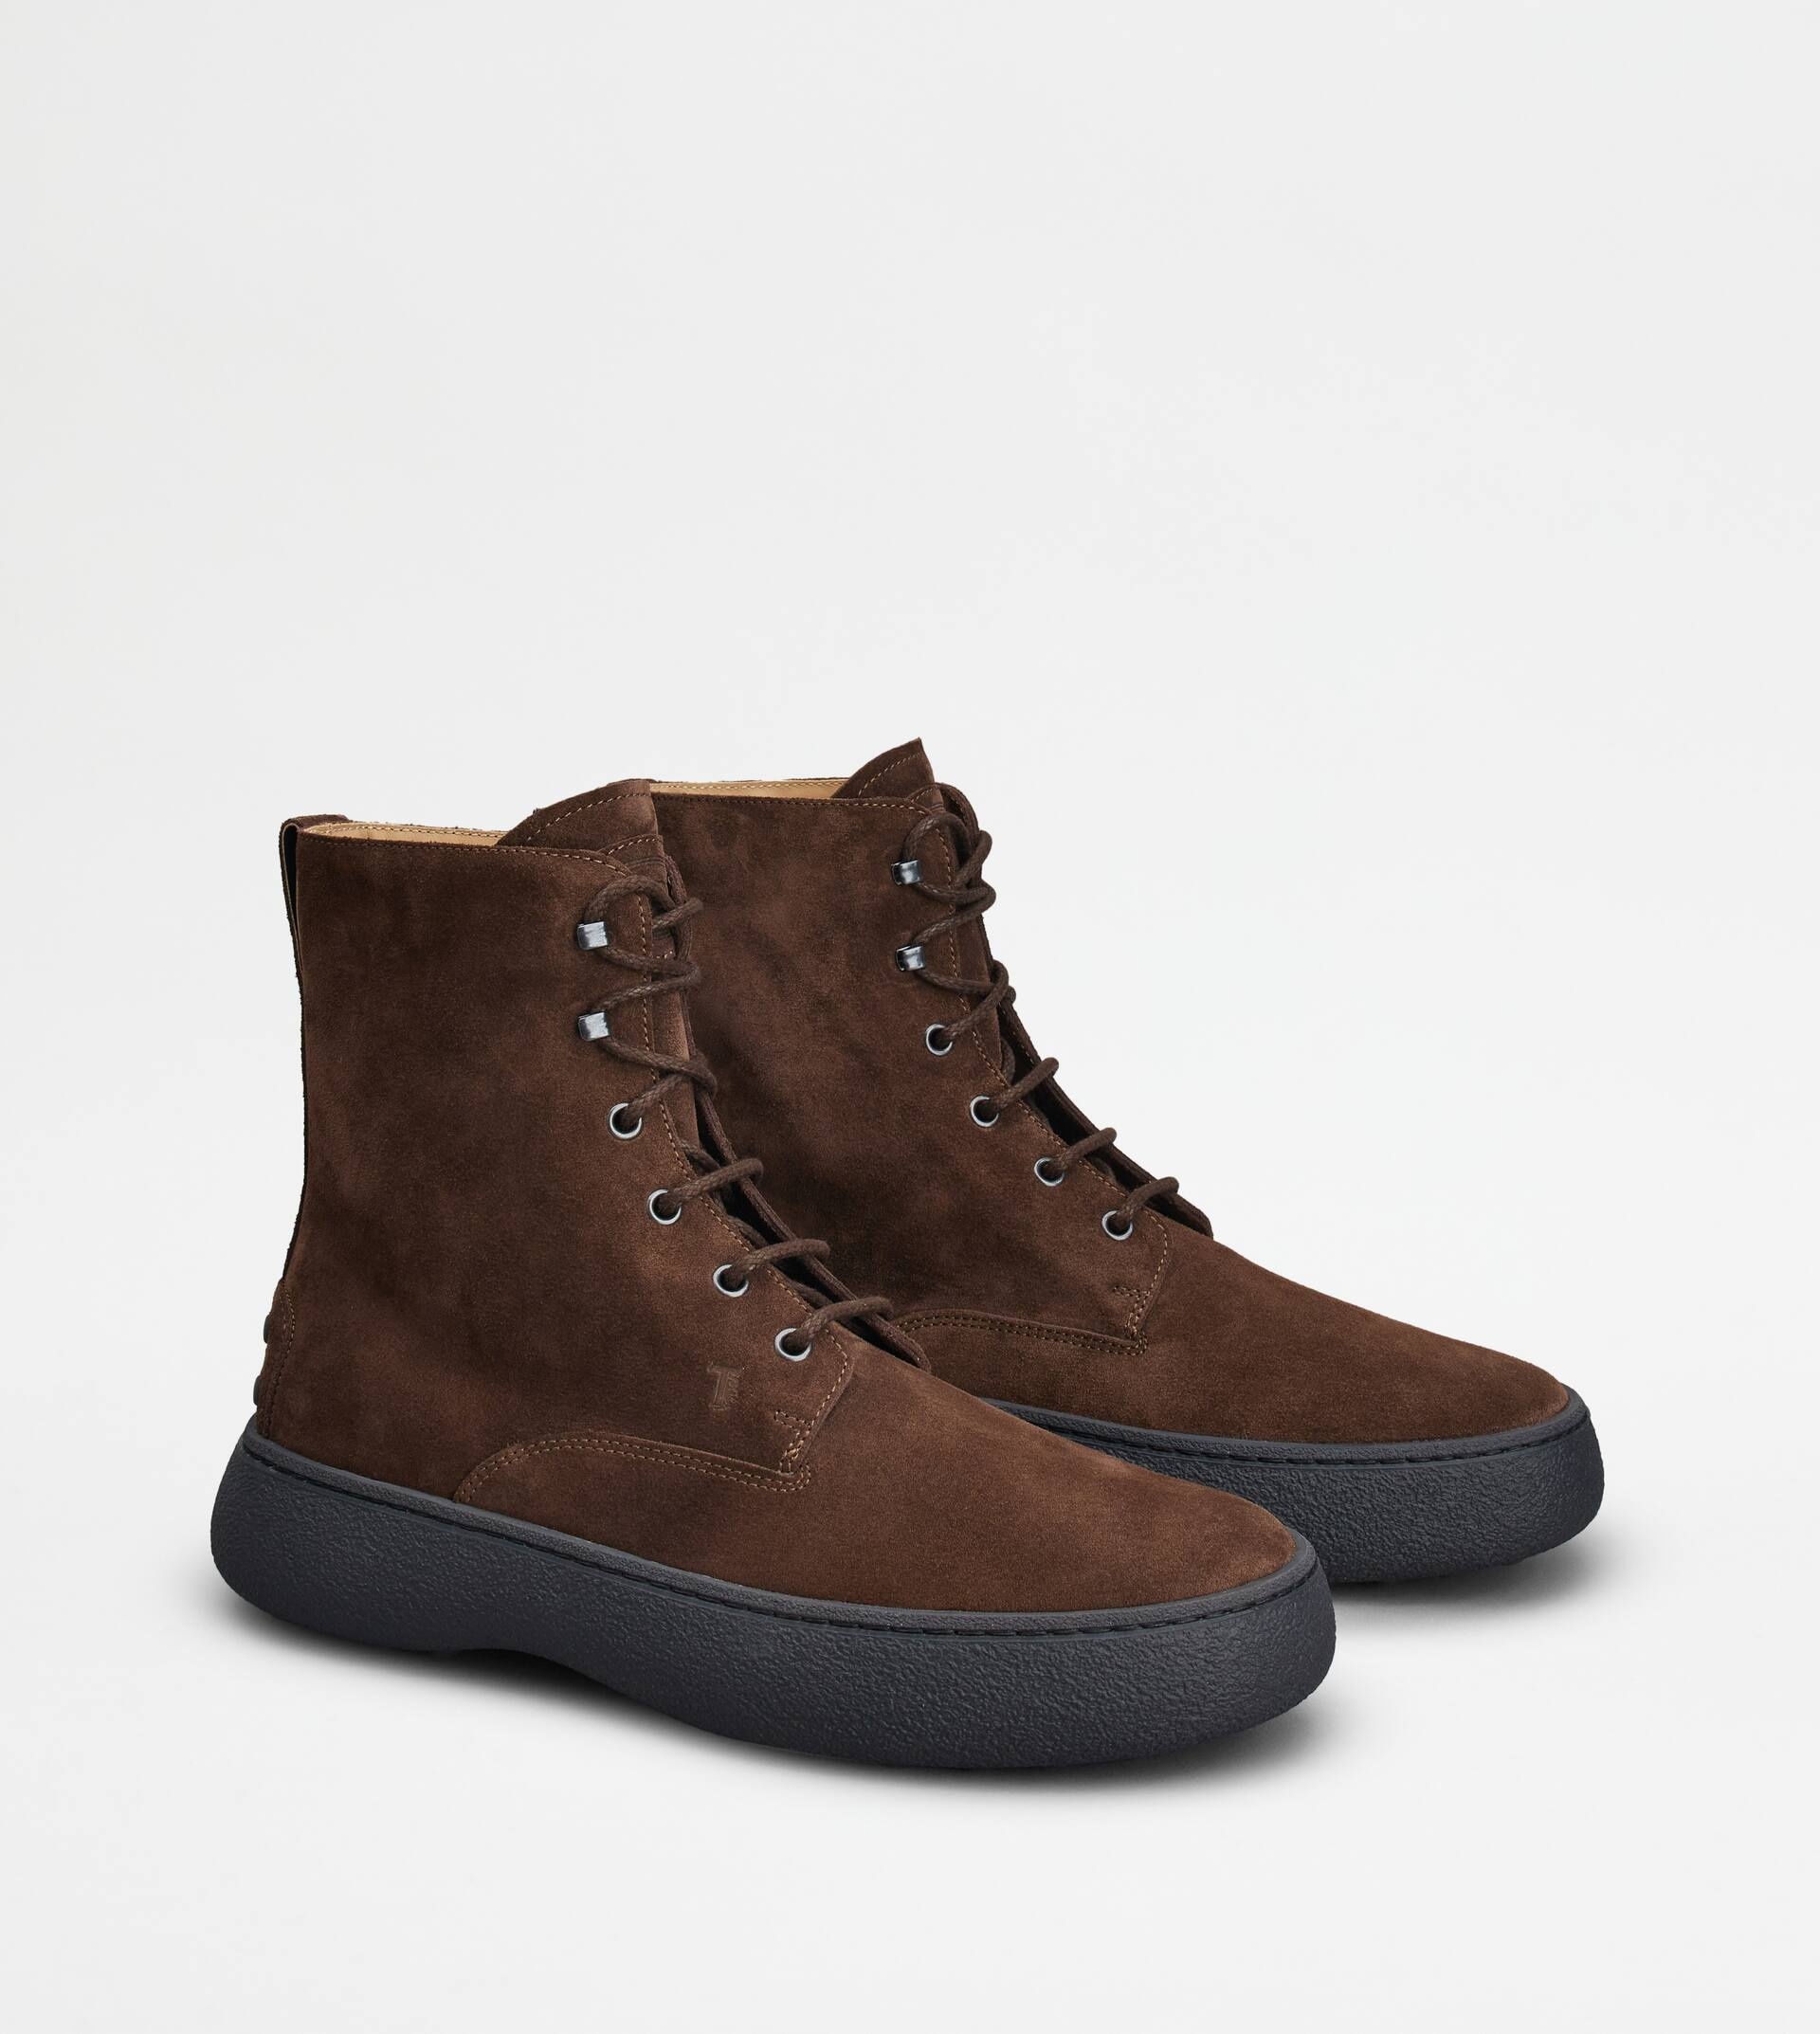 TOD'S W. G. LACE-UP ANKLE BOOTS IN SUEDE - BROWN - 4